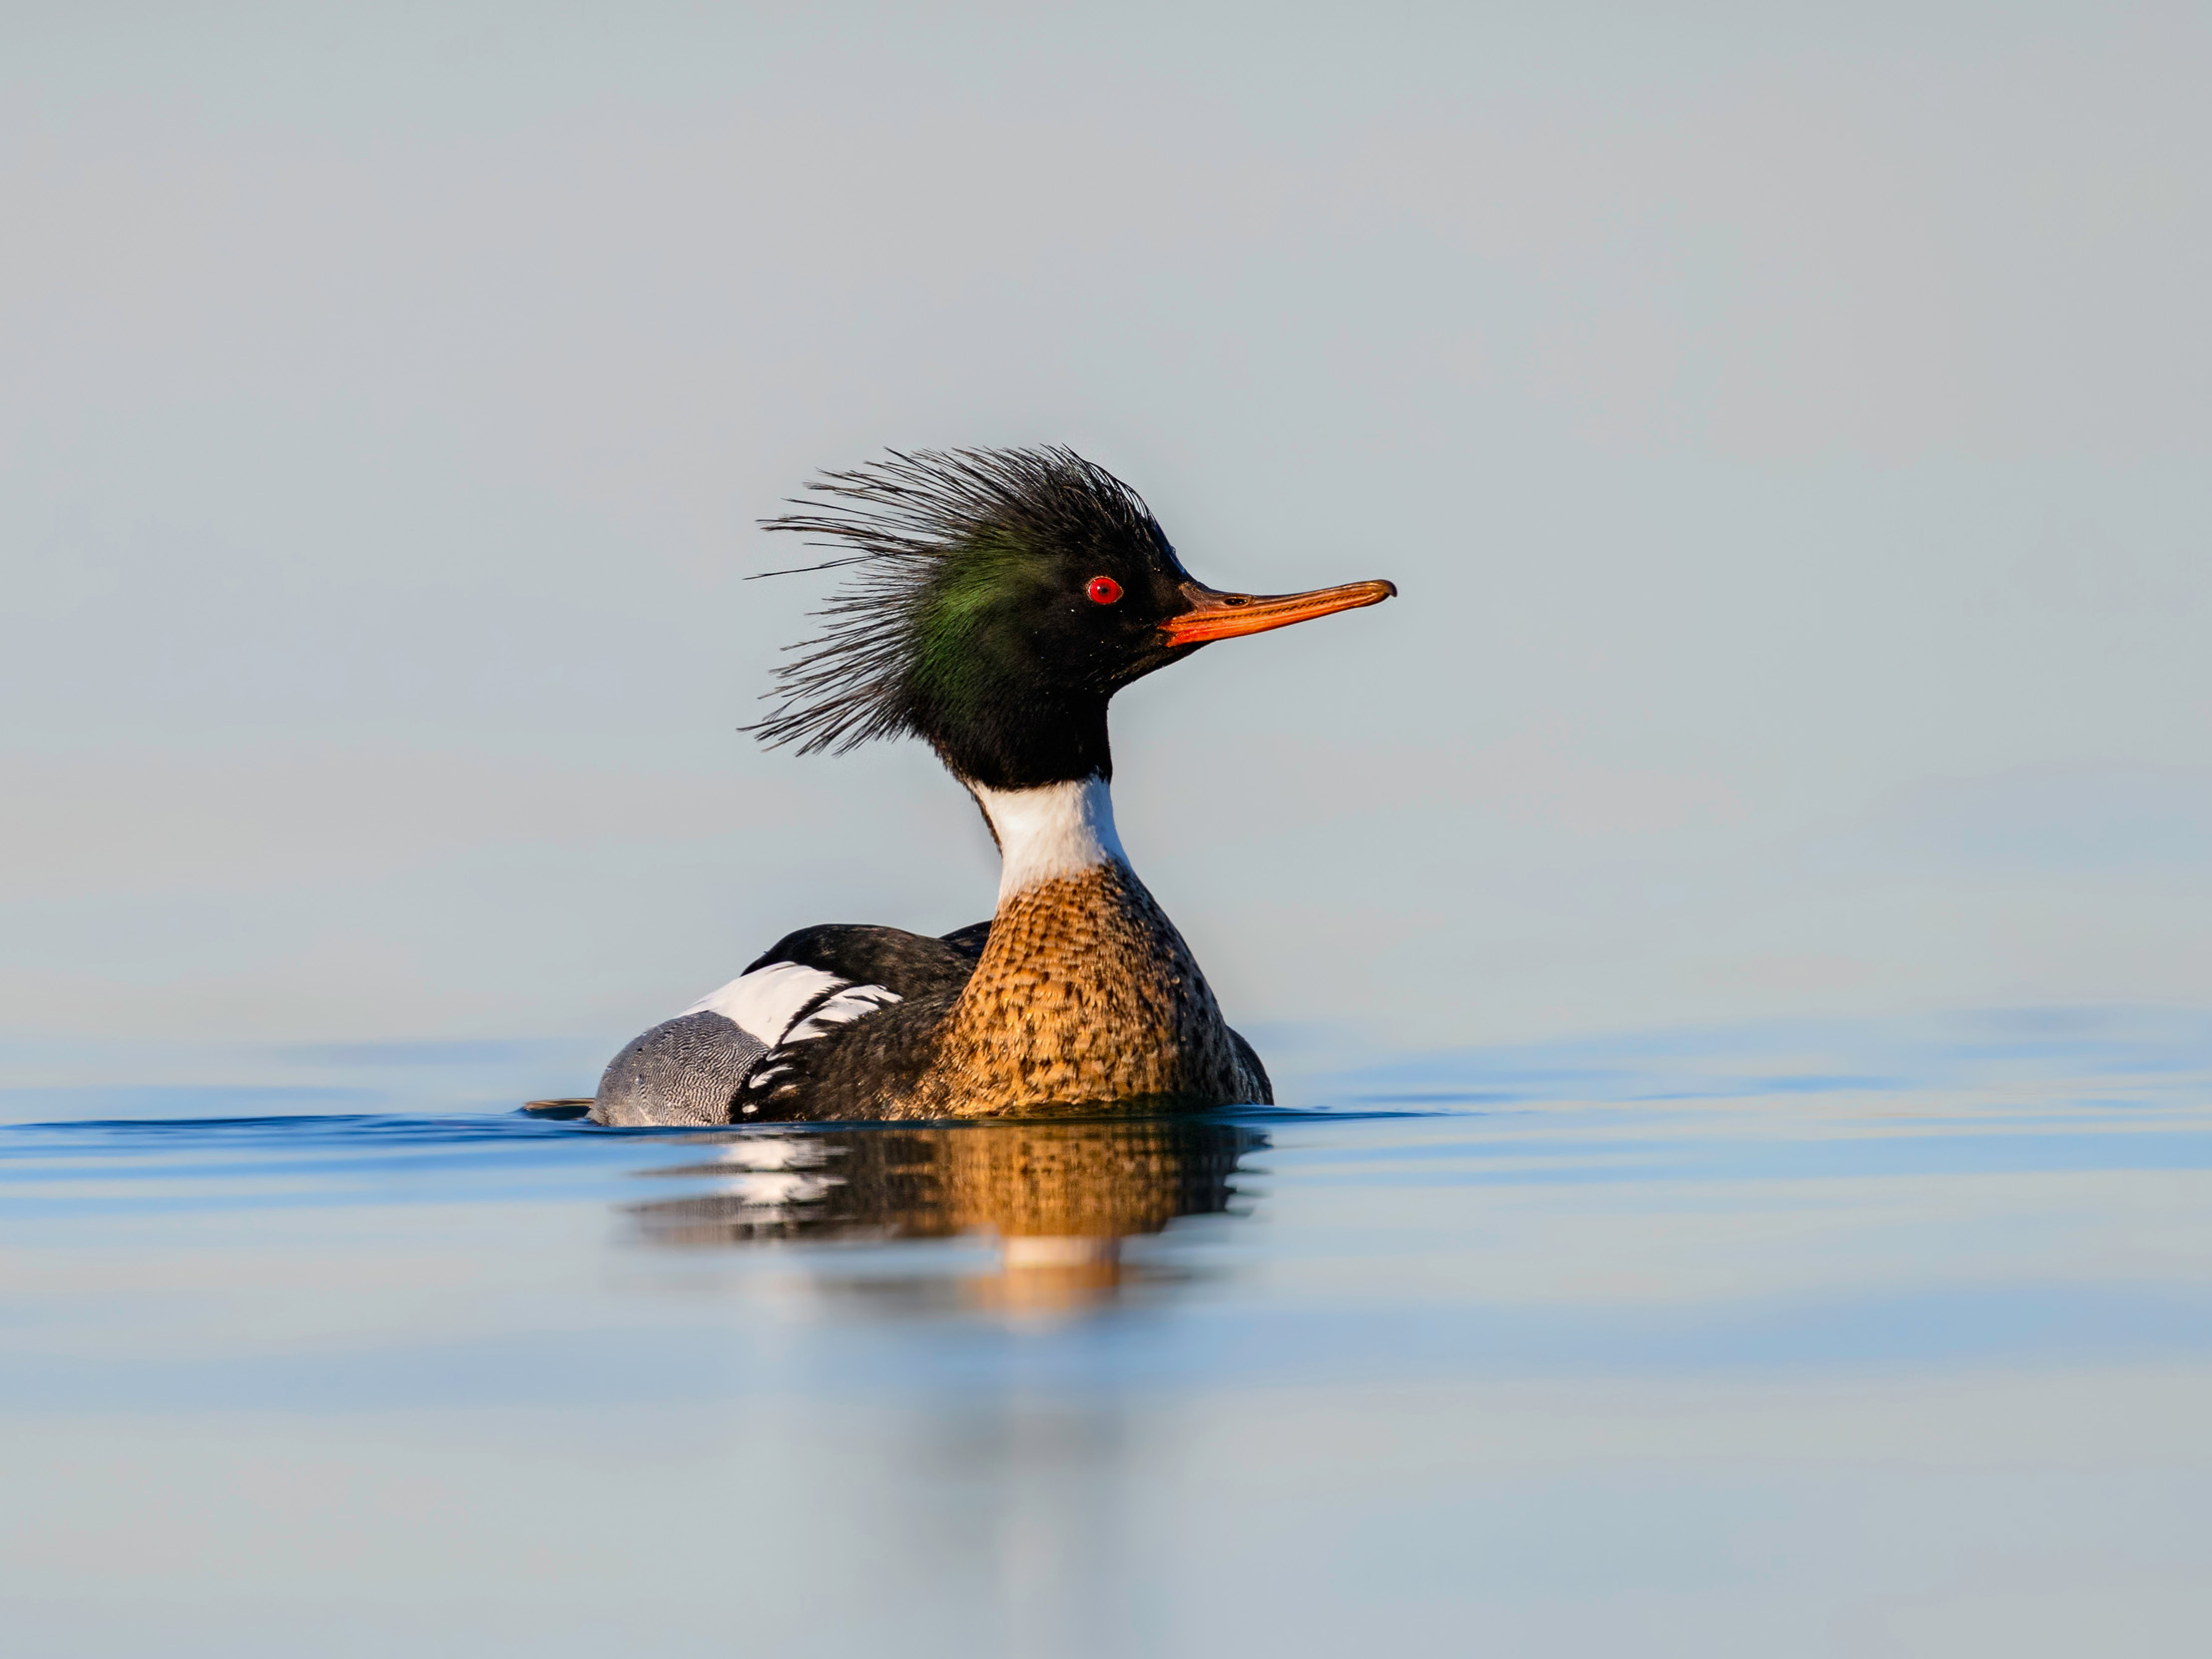 A male Red-breasted Merganser swimming in the morning sunlight.